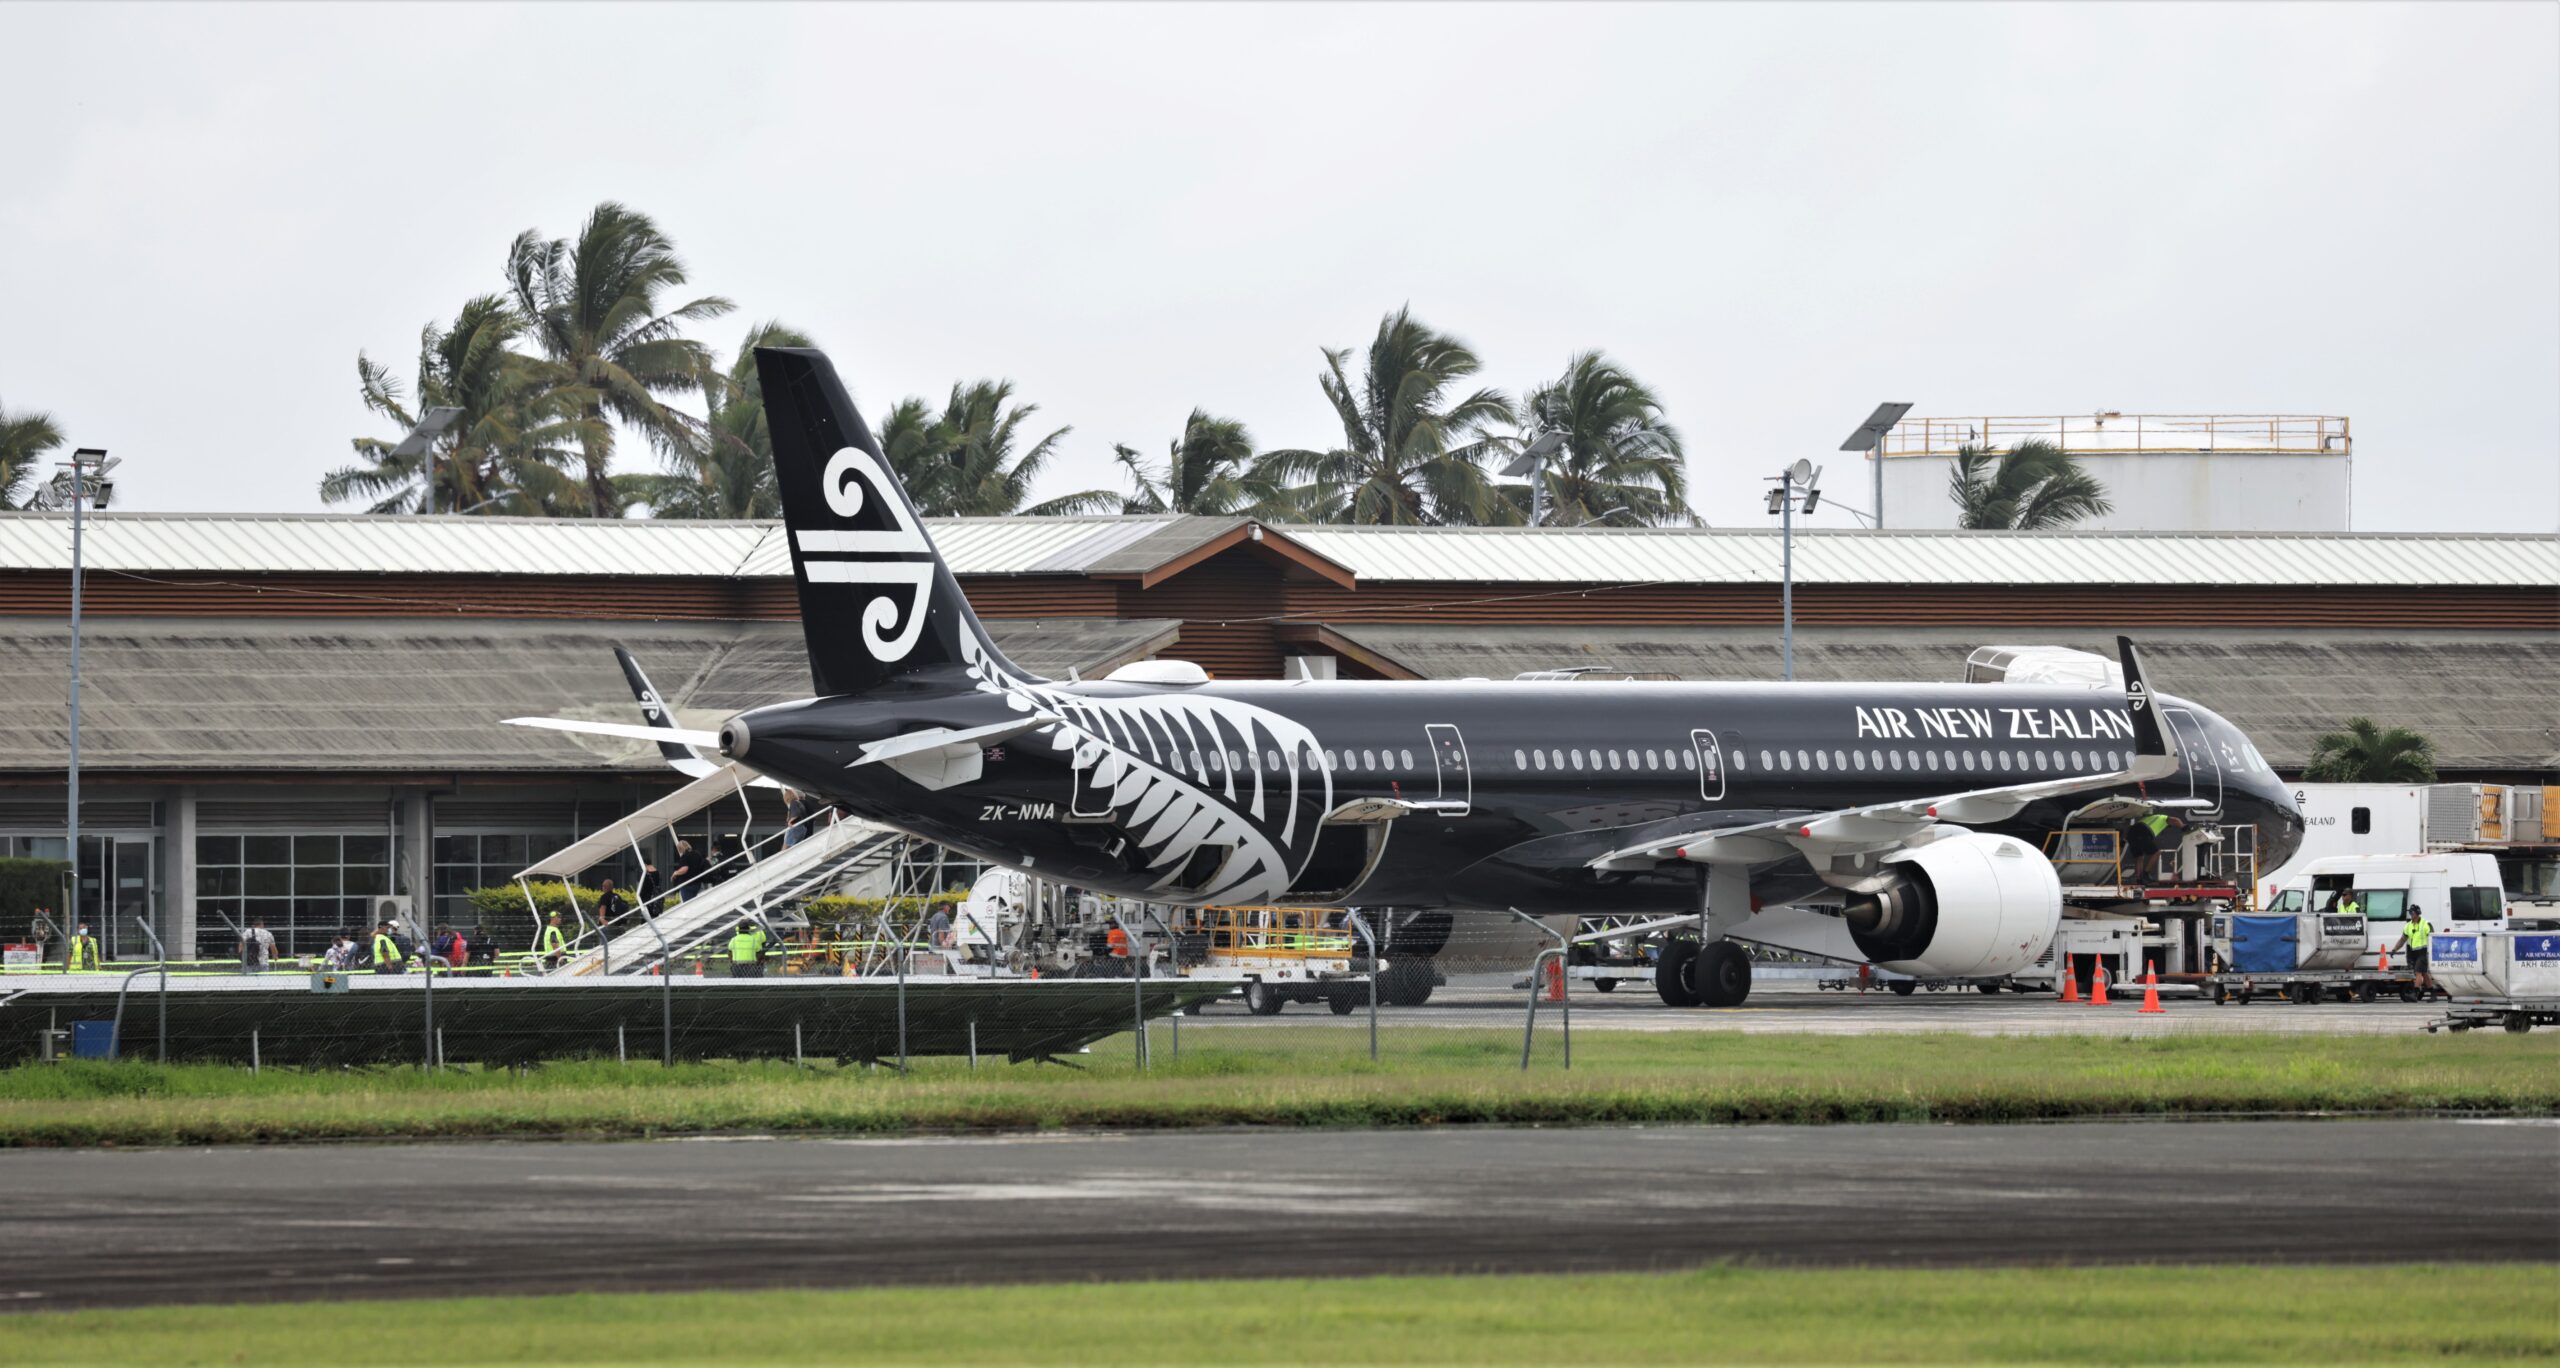 Air New Zealand legal cost details still up in the air